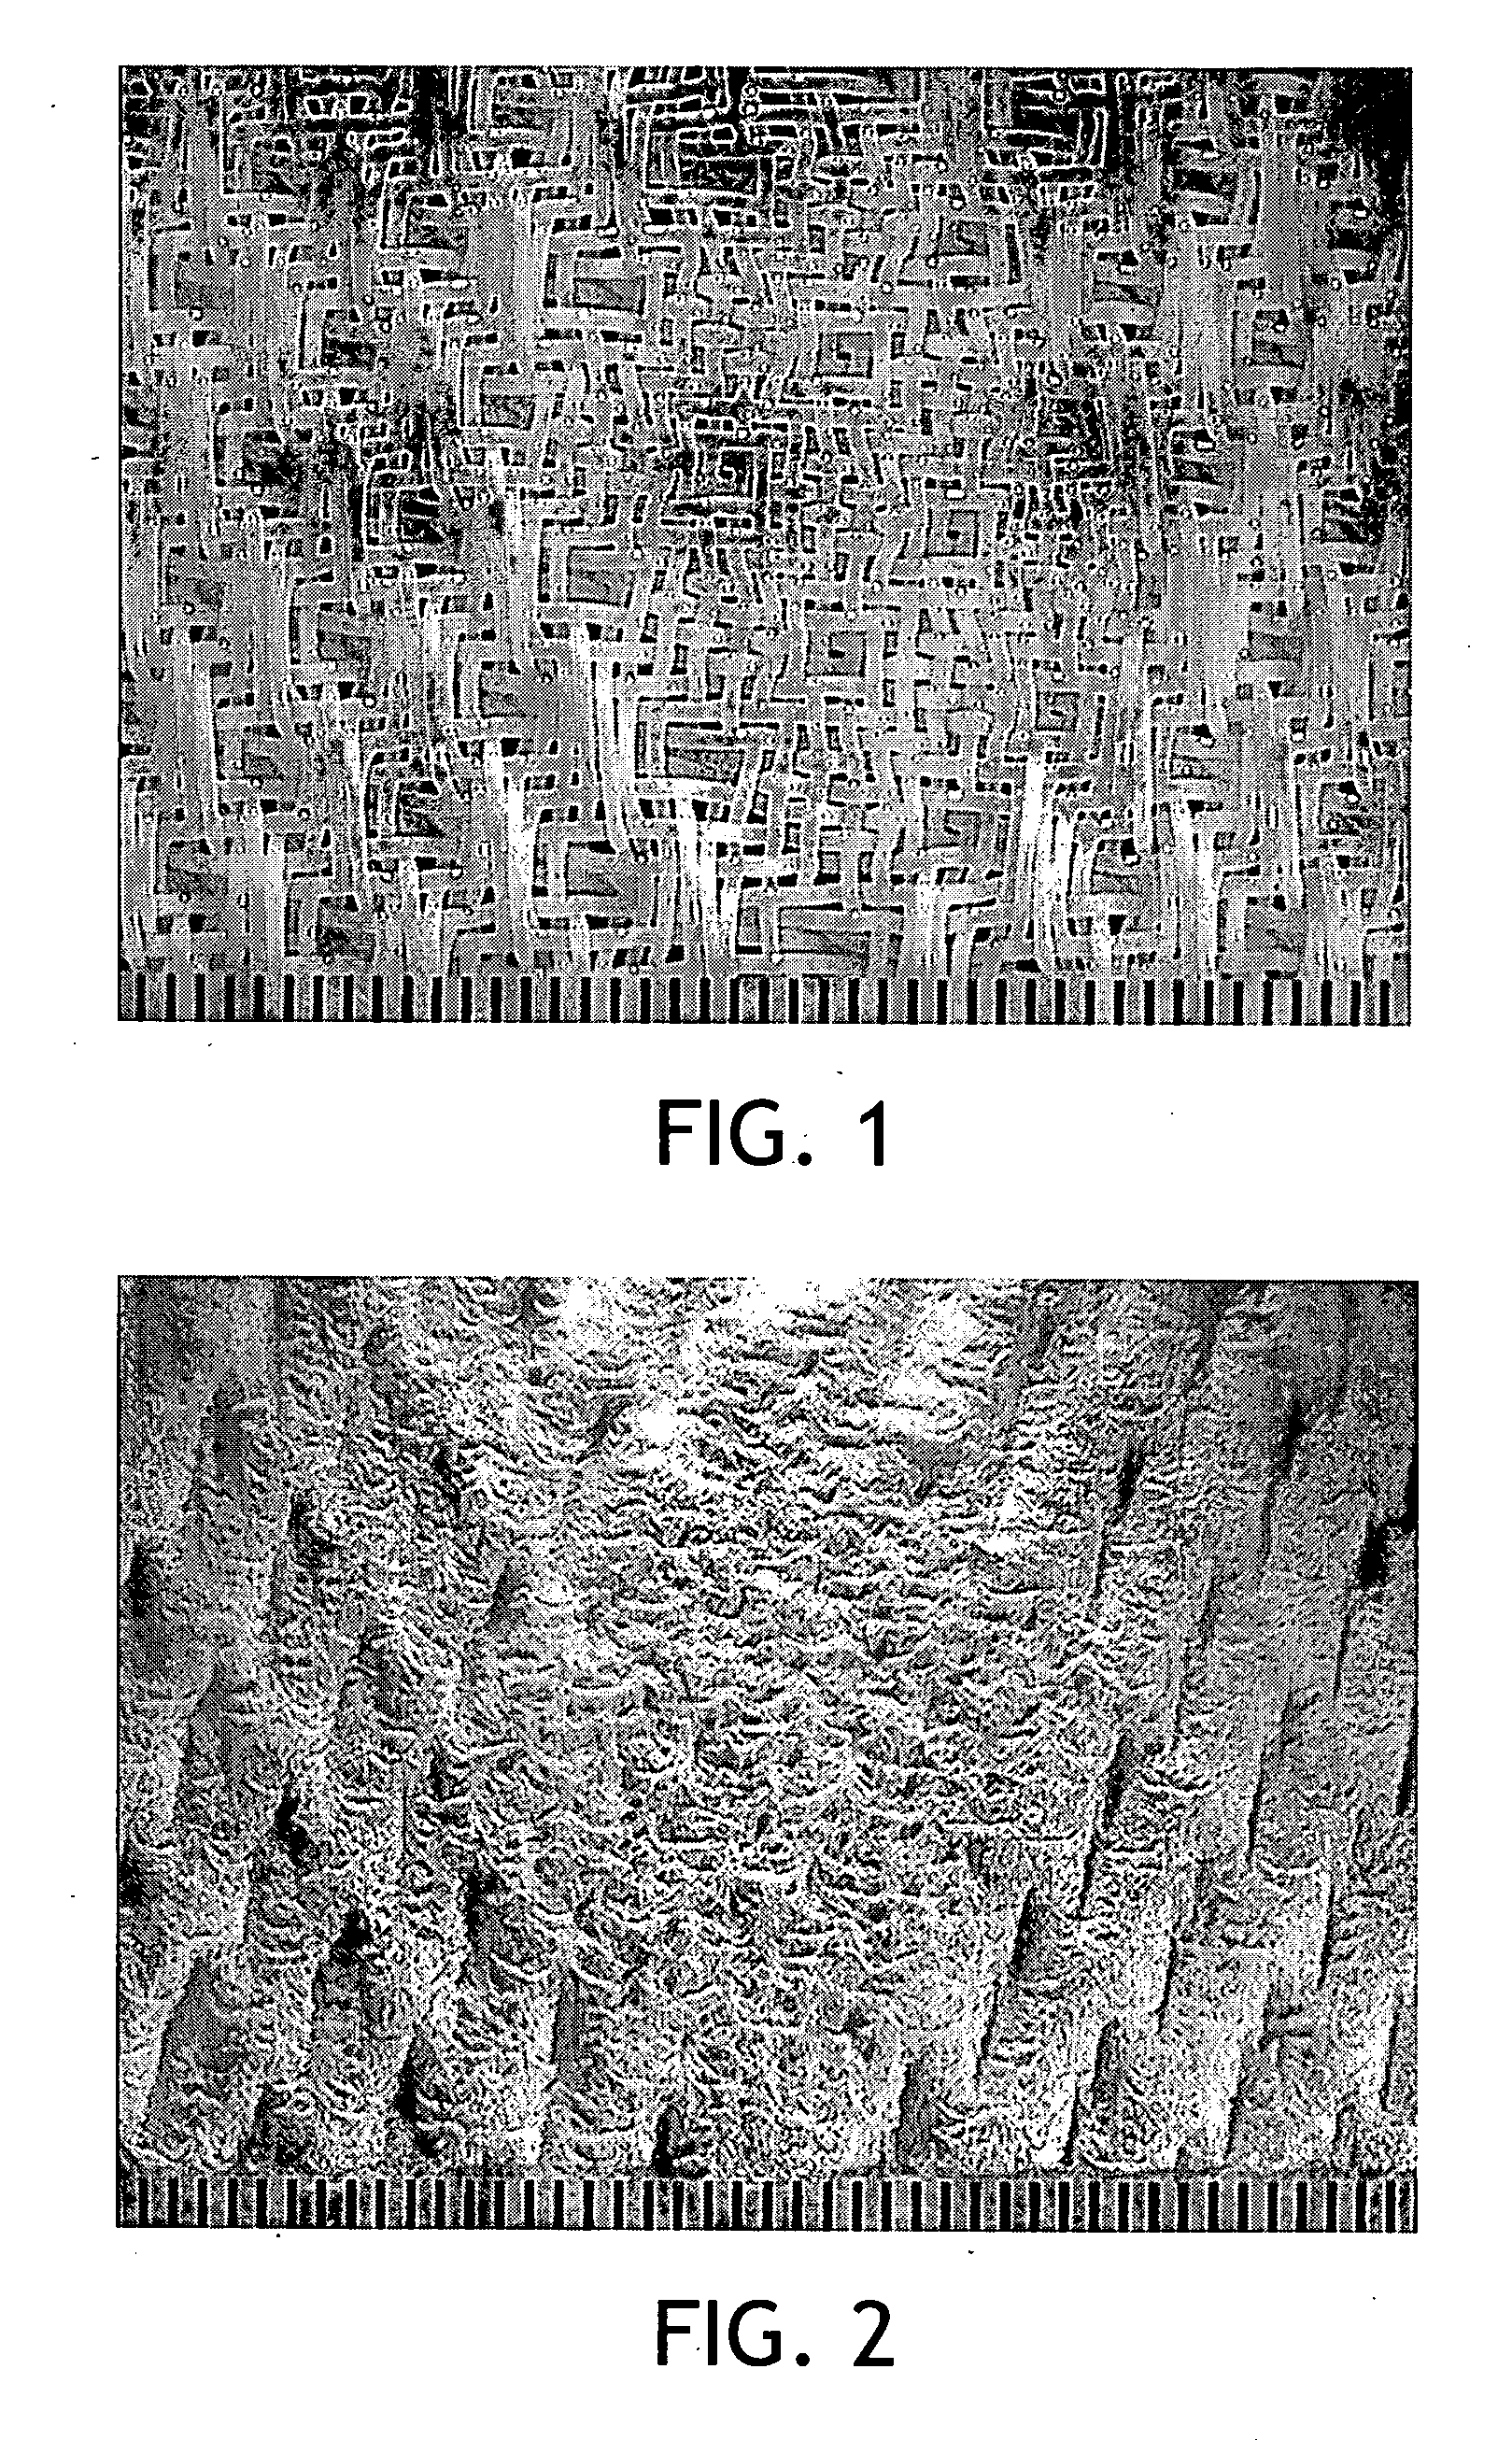 Method of making tissue sheets with textured woven fabrics having highlighted design elements